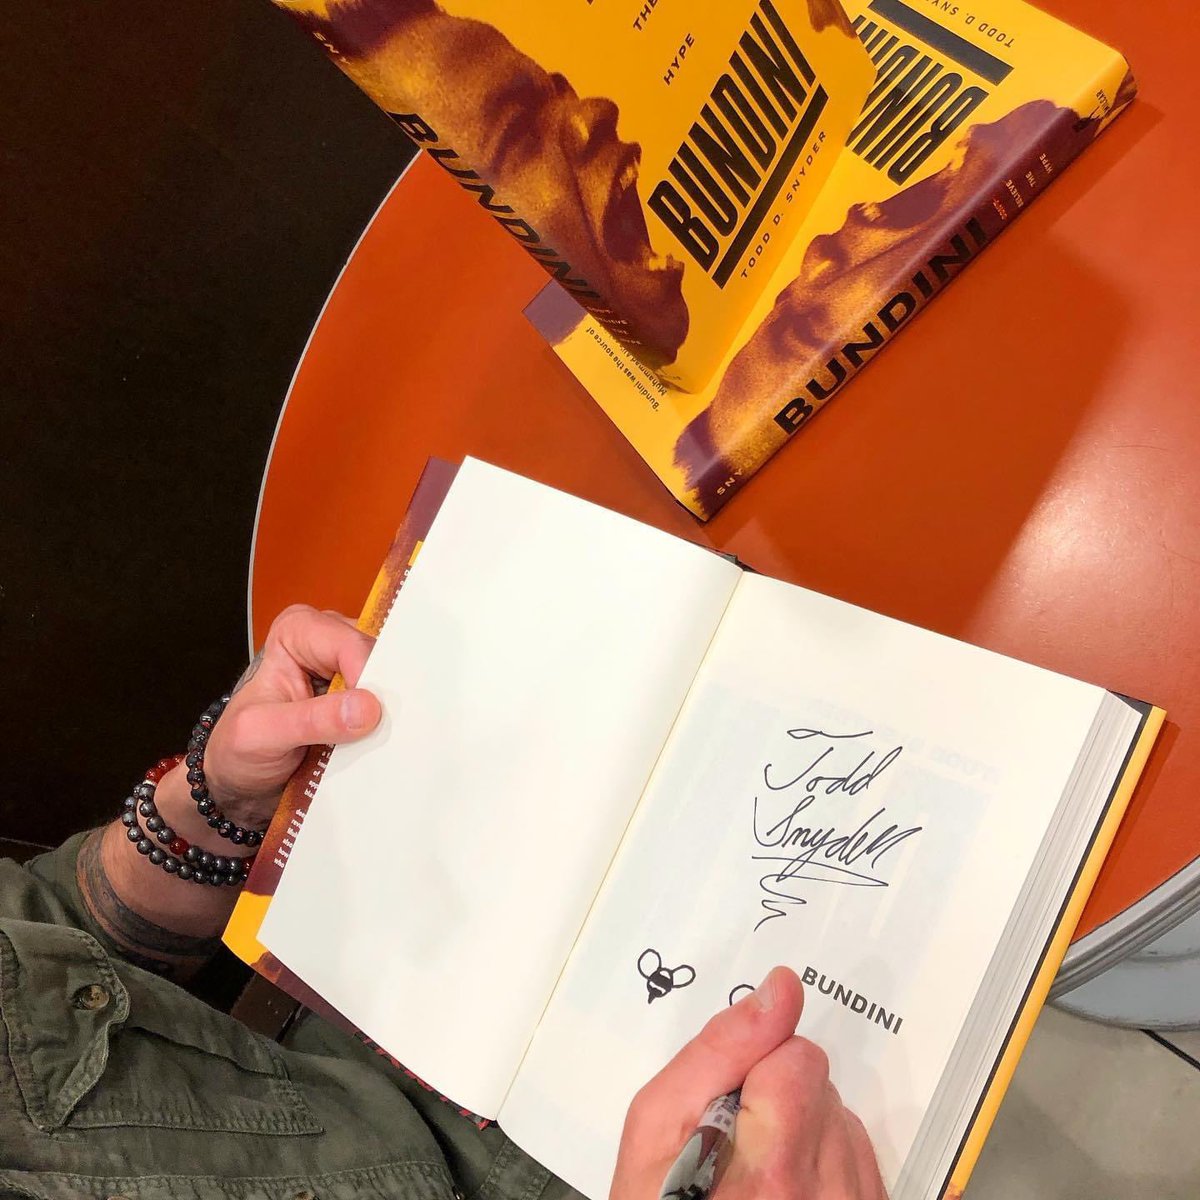 Capital District Friends: Signed copies of “Bundini: Don’t Believe the Hype” are now available at @BNColonieCenter 🦋🐝 #drewbundinibrown #dontbelievethehype #muhammadali #boxing #boxingbooks #colonieny #floatlikeabutterflystinglikeabee #albanyny #518writers @HamilcarPubs